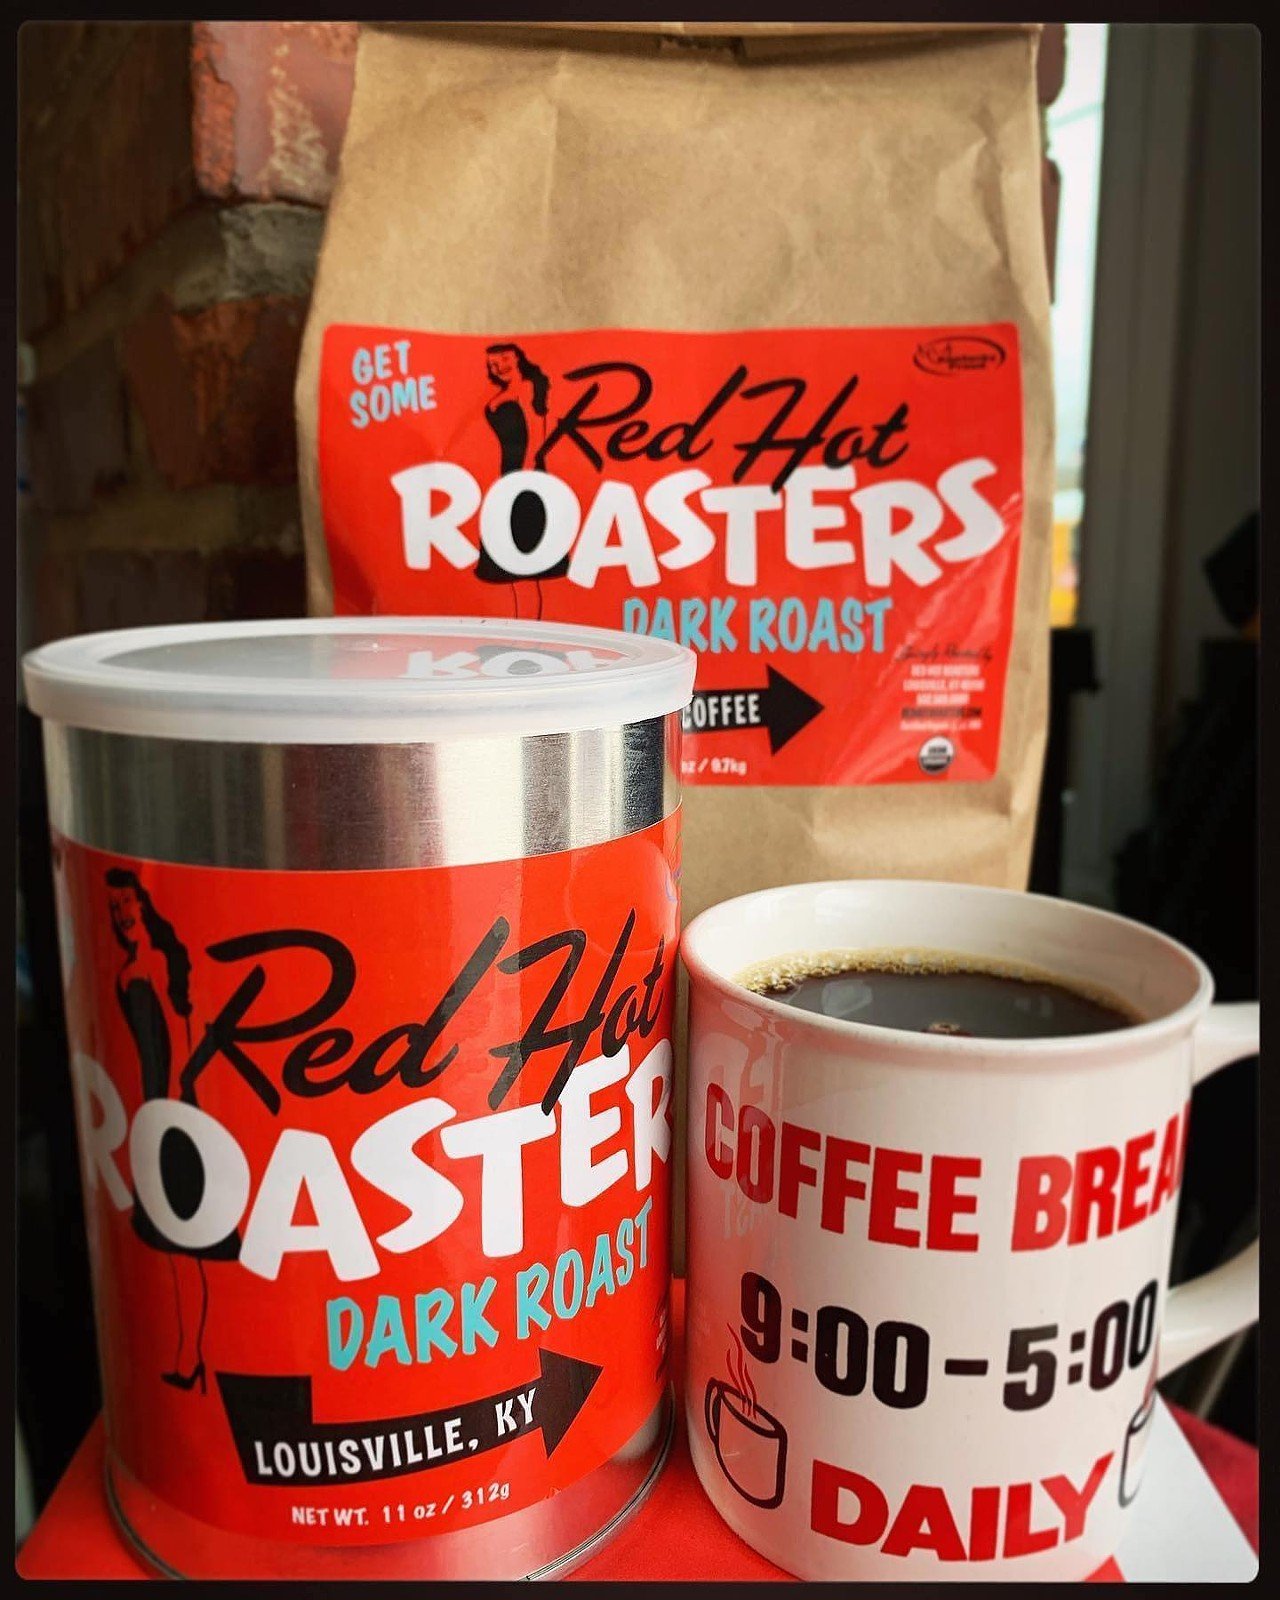 Red Hot Roasters
1399 Lexington Rd. 
This retro style coffee shop is nationally featured in the Food Network magazine and HGTV magazine, and for good reason.